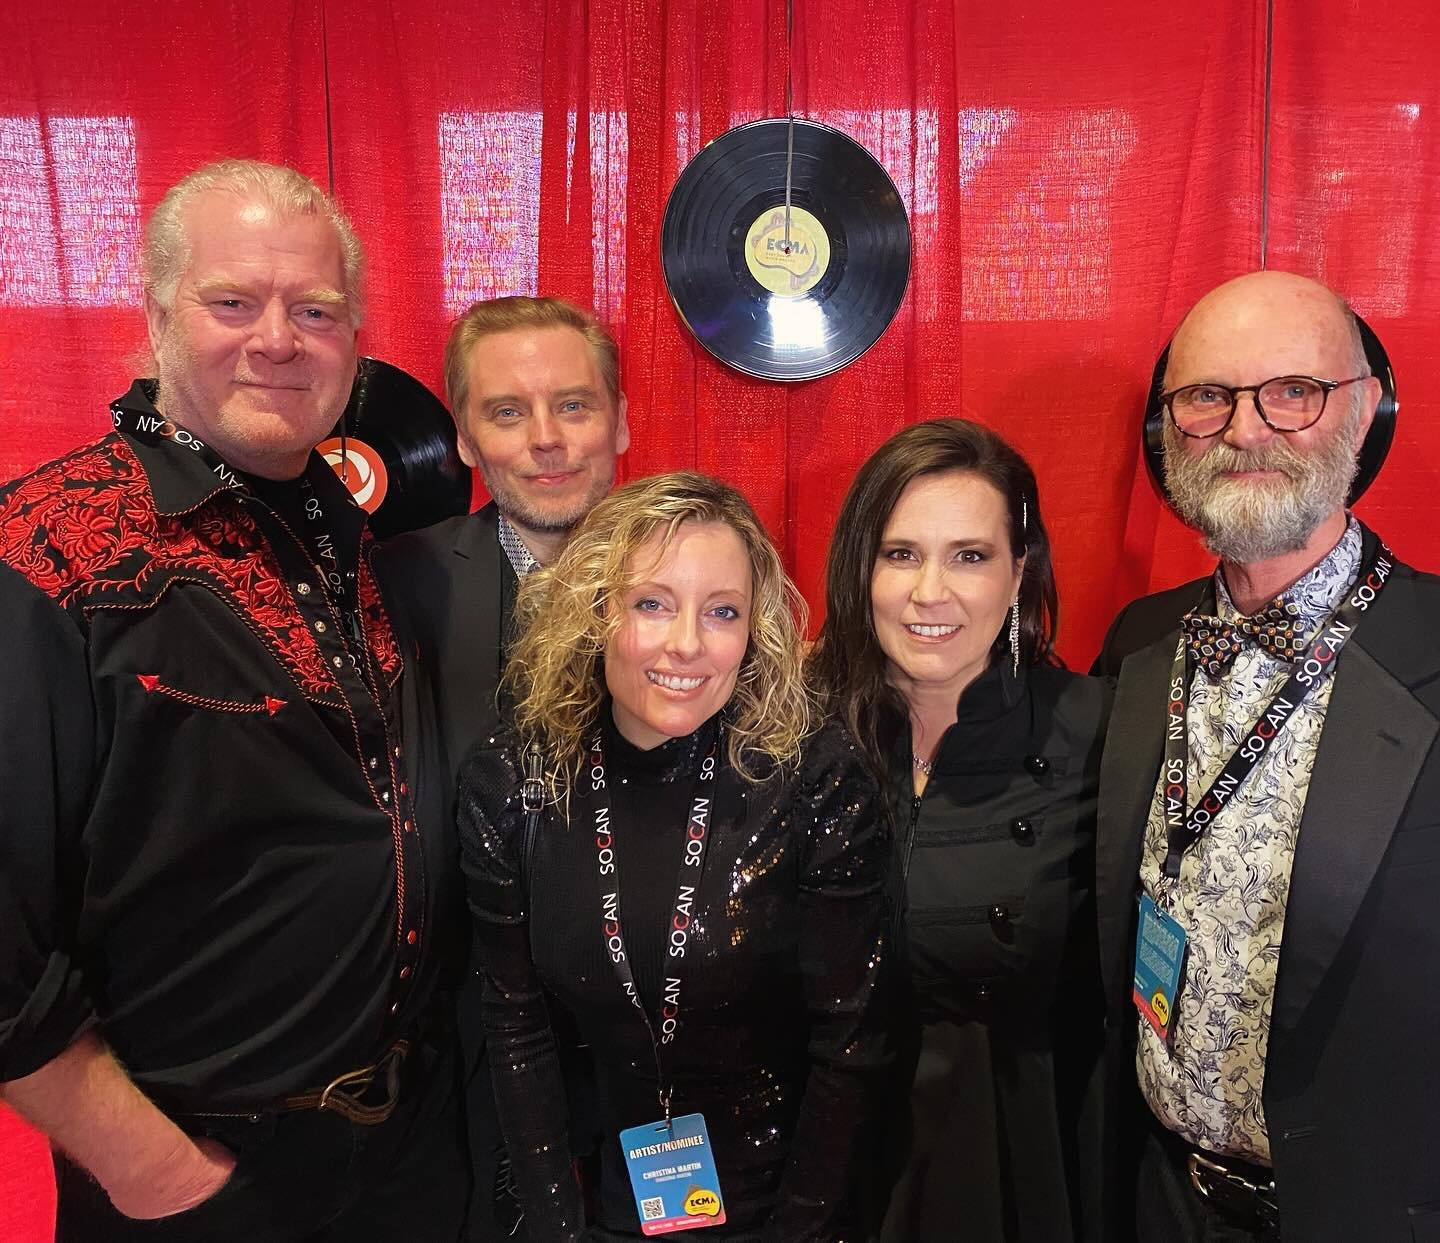 Nice to meet and reconnect with old and new friends &amp; delegates and to showcase at the ECMA&rsquo;s. Charlottetown was a ton of fun!

@billpreeper @ea_sandy_mackay @dalemurraystudio @xtinamartinmusic #ecma2024